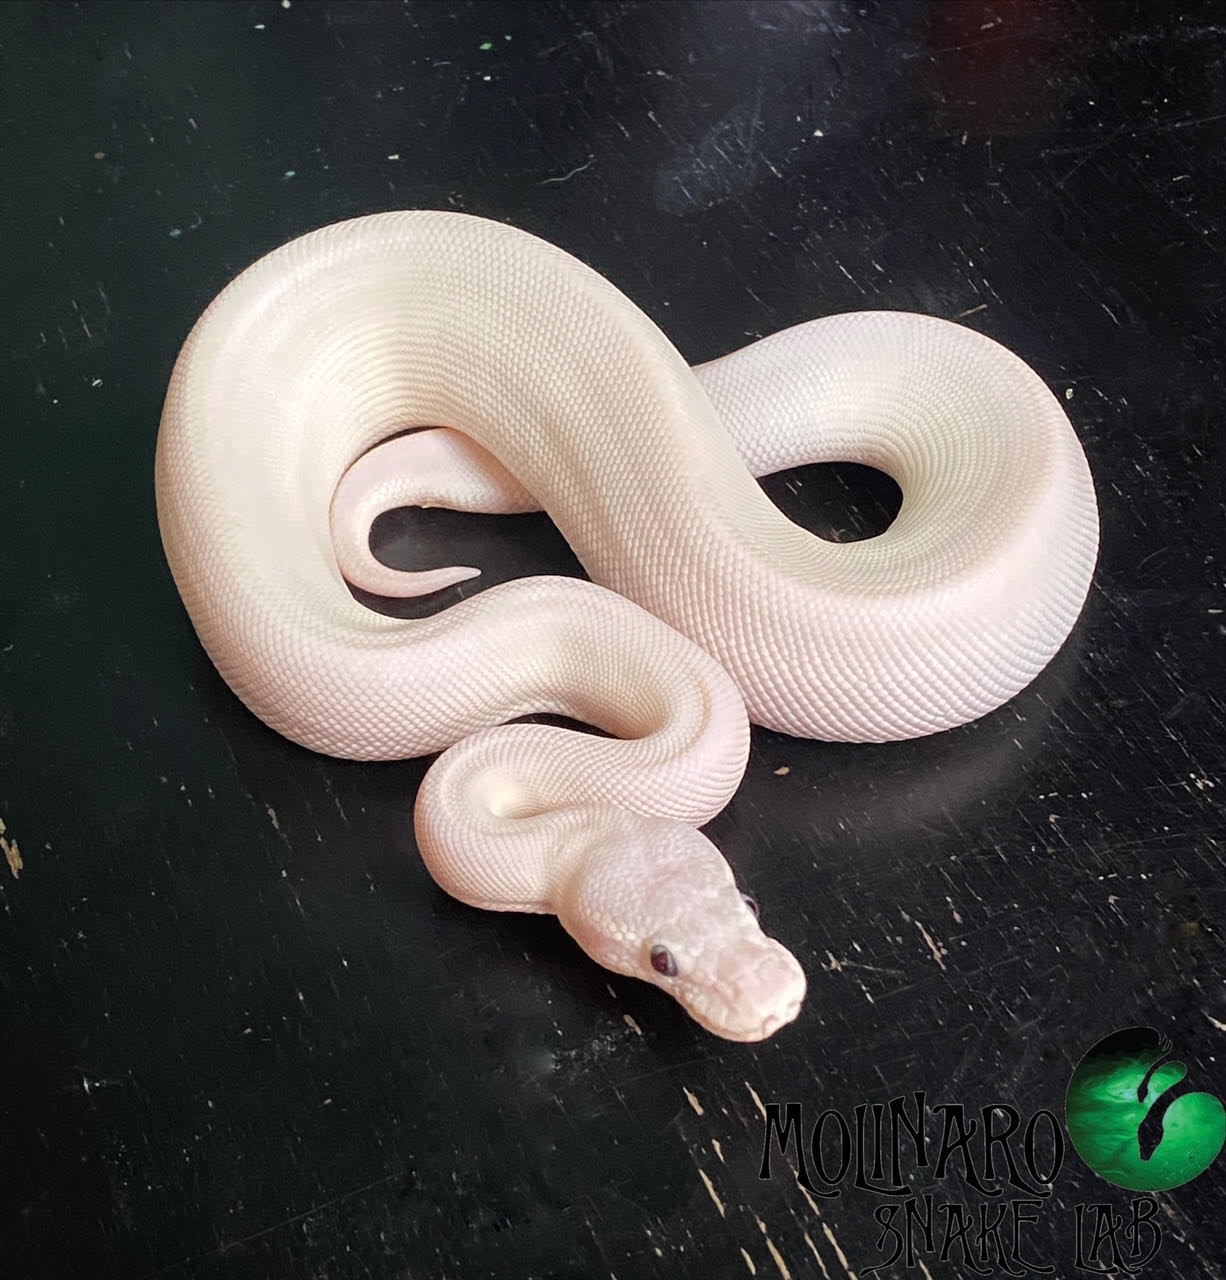 Rare, leucistic white snake with blue eyes found in Mississippi